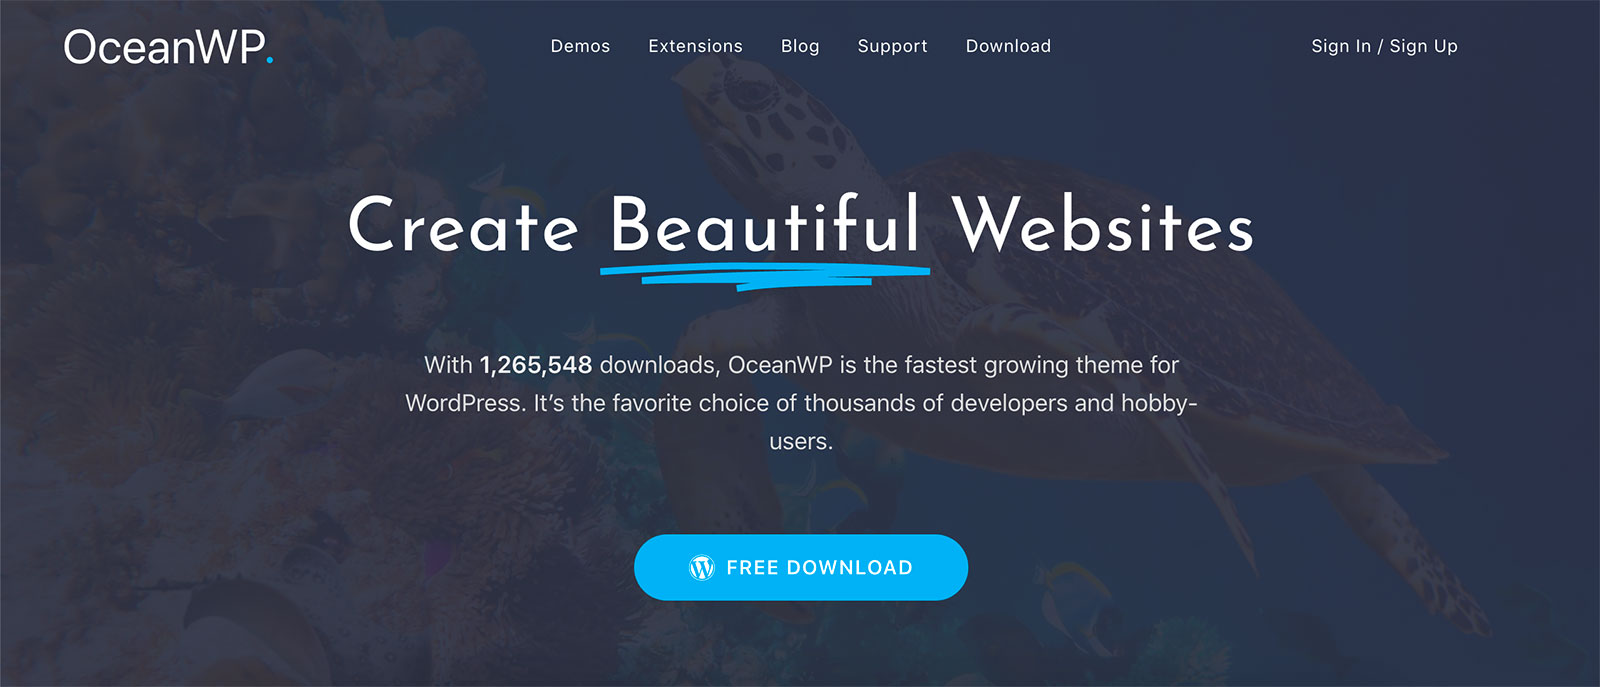 OceanWP WordPress Theme - Page d'accueil